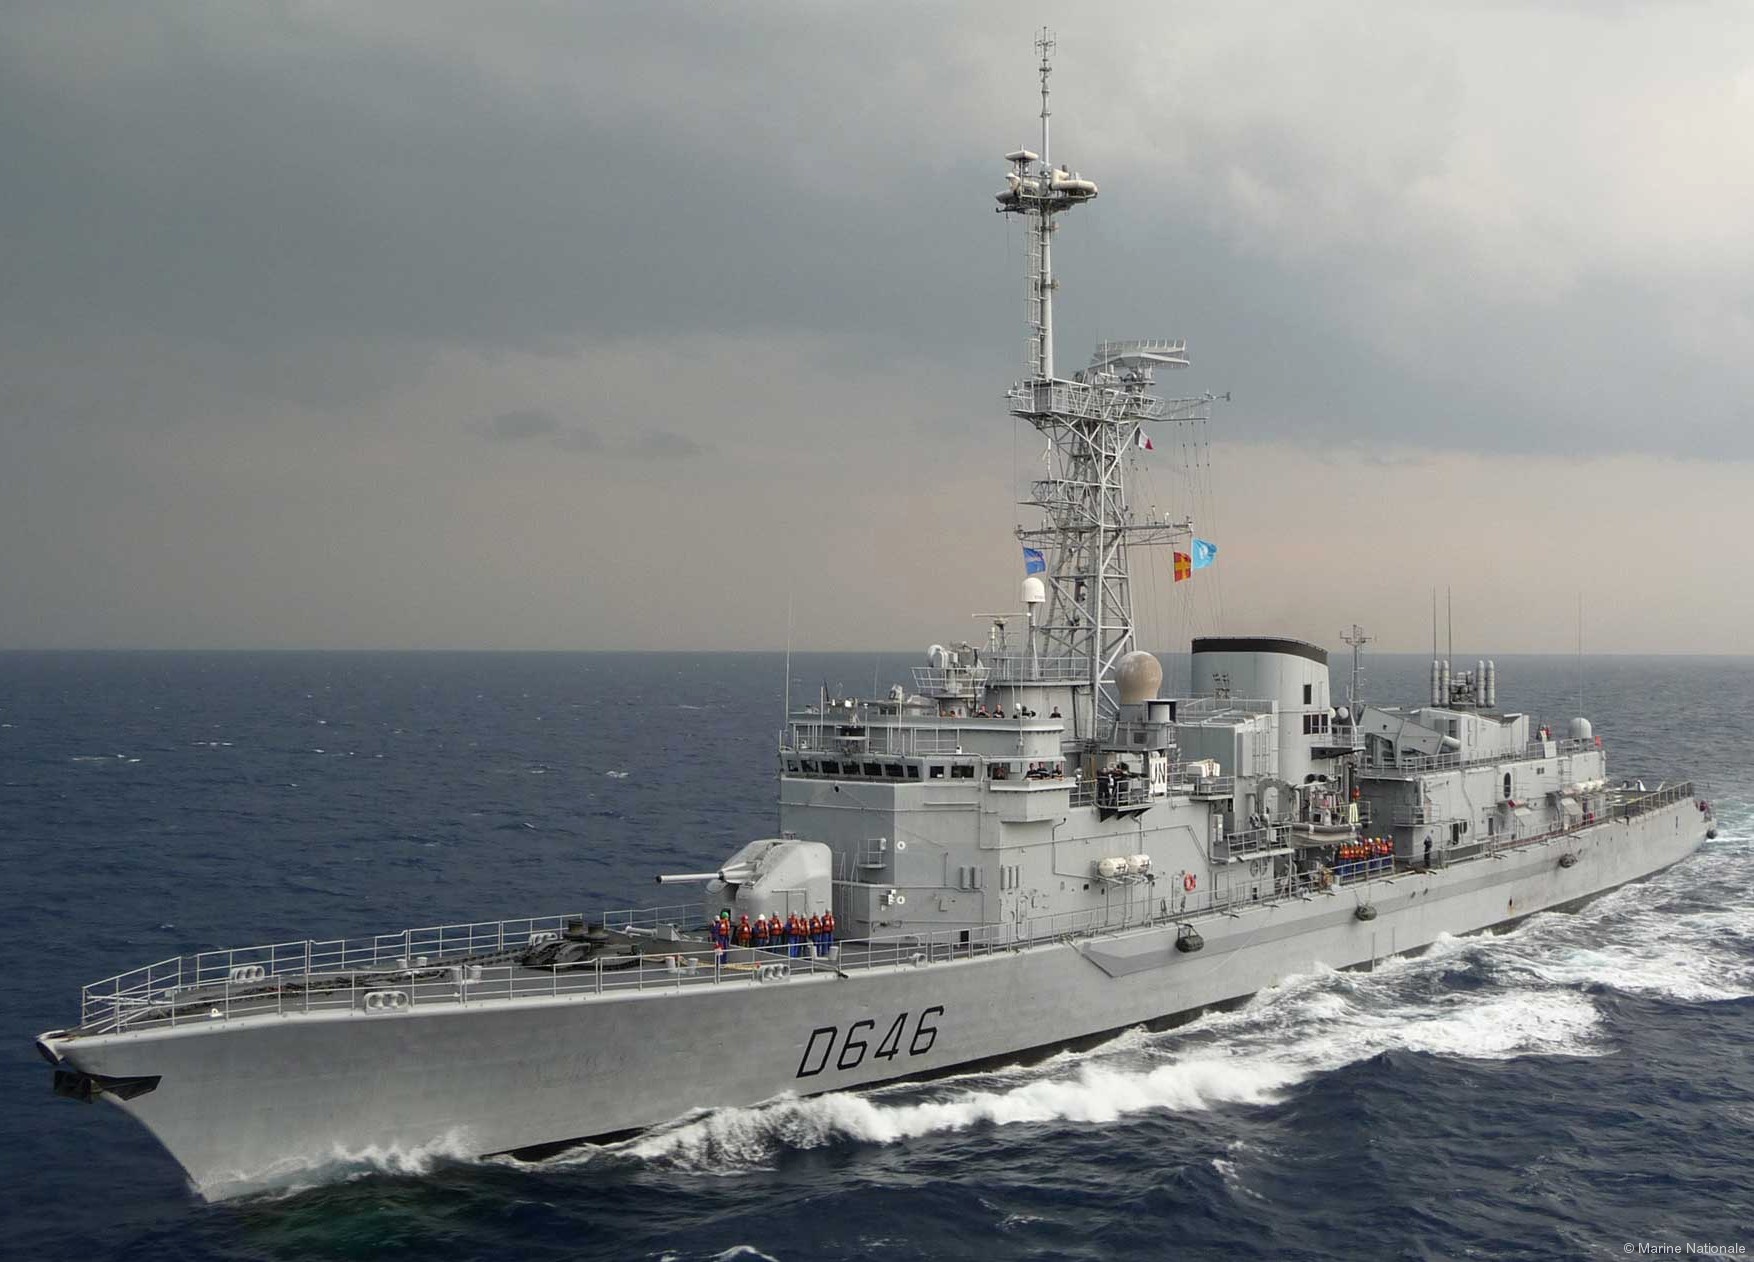 d-646 fs latouche treville f70as frigate destroyer asw french navy marine nationale 09